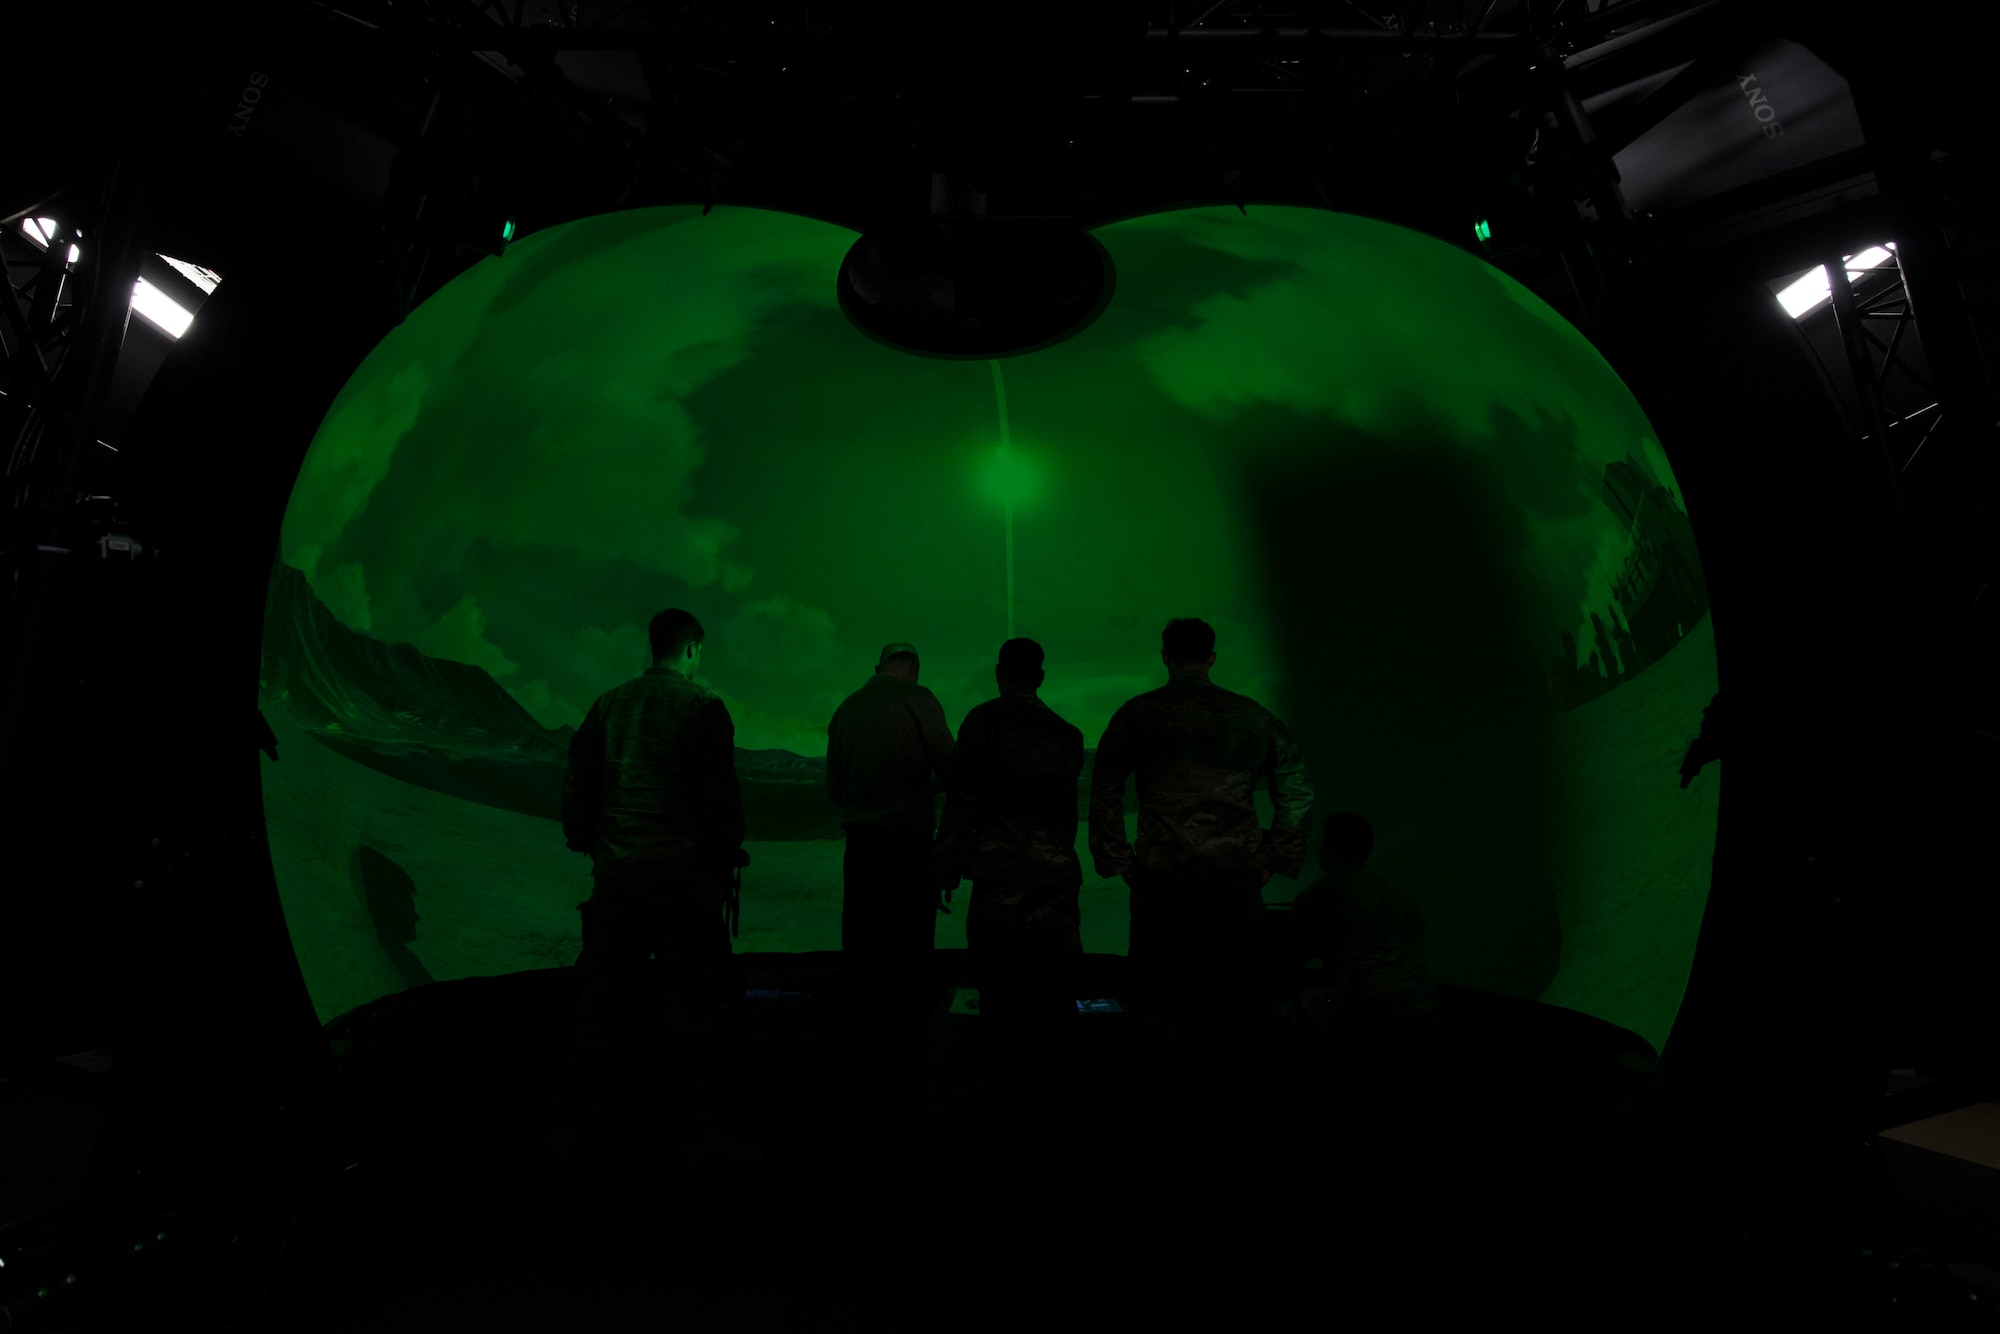 Airmen assigned to the 2nd Air Support Operations Squadron supported NATO allies with a state of the art, joint terminal attack controller, virtual training simulator March 6, 2018, at U.S. Army Garrison Bavaria in Vilseck, Germany.